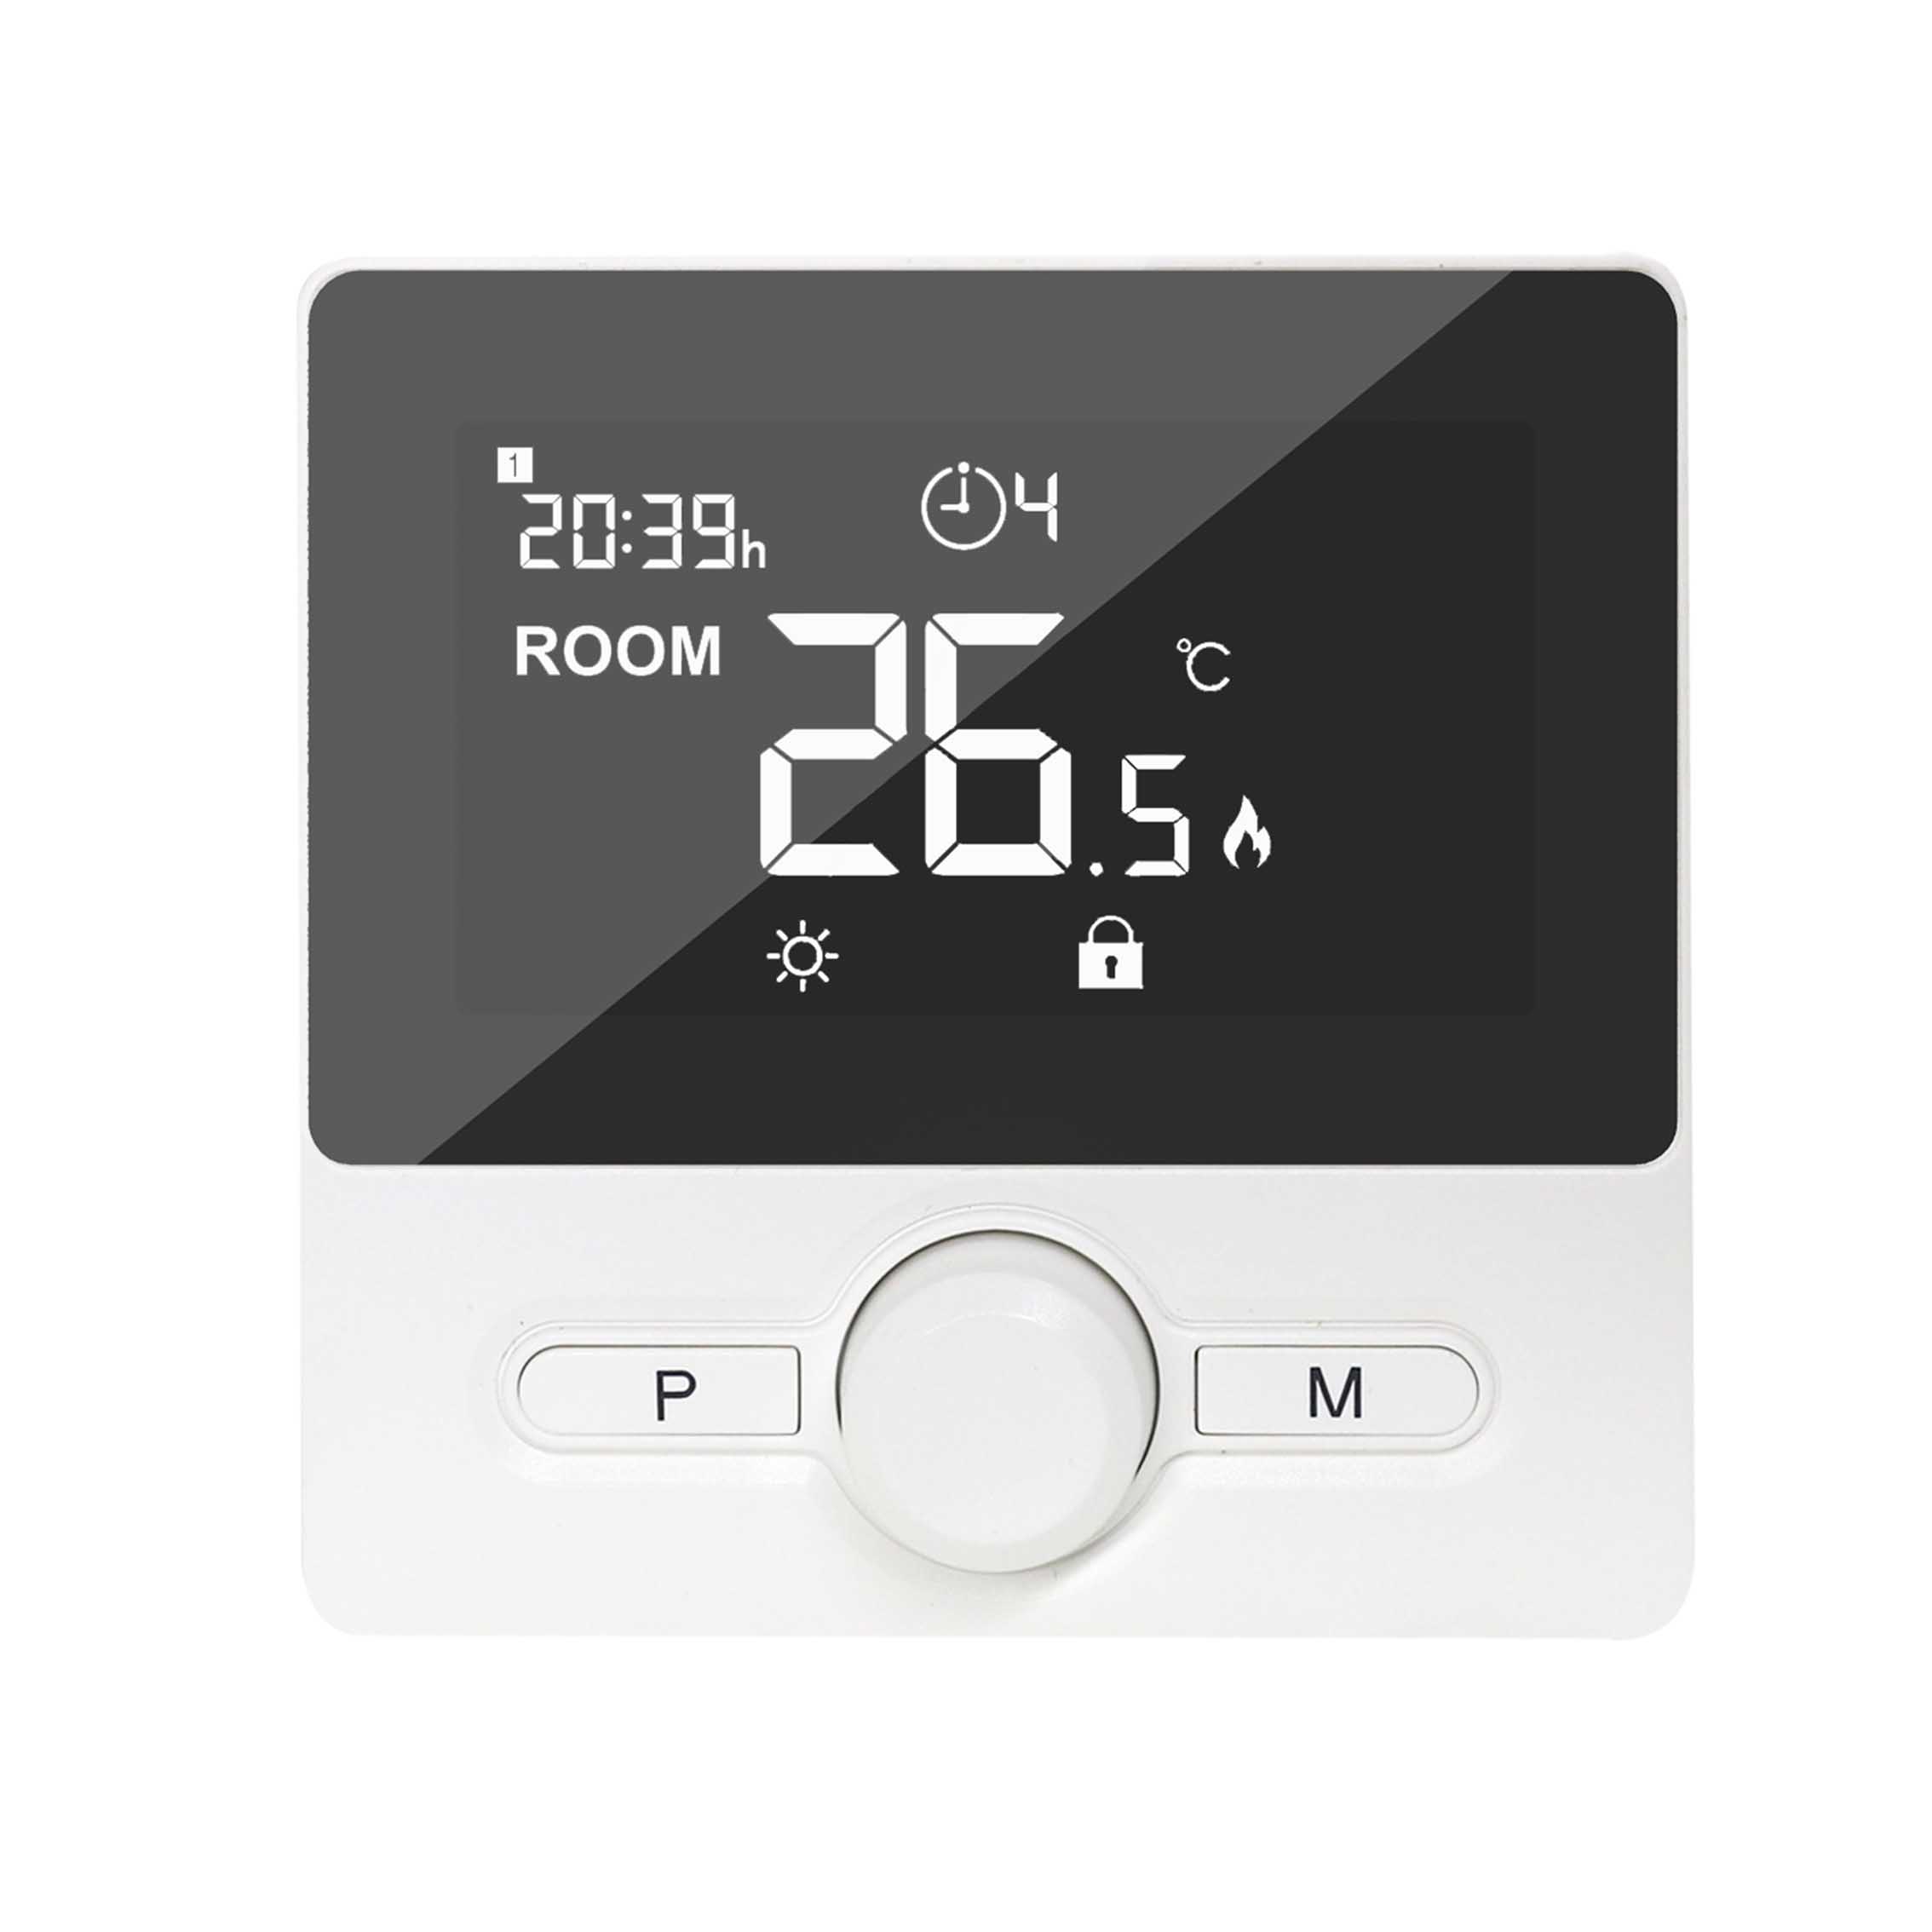 New Arrival Battery Power Programmable Wired Thermostat for underfloor heating control